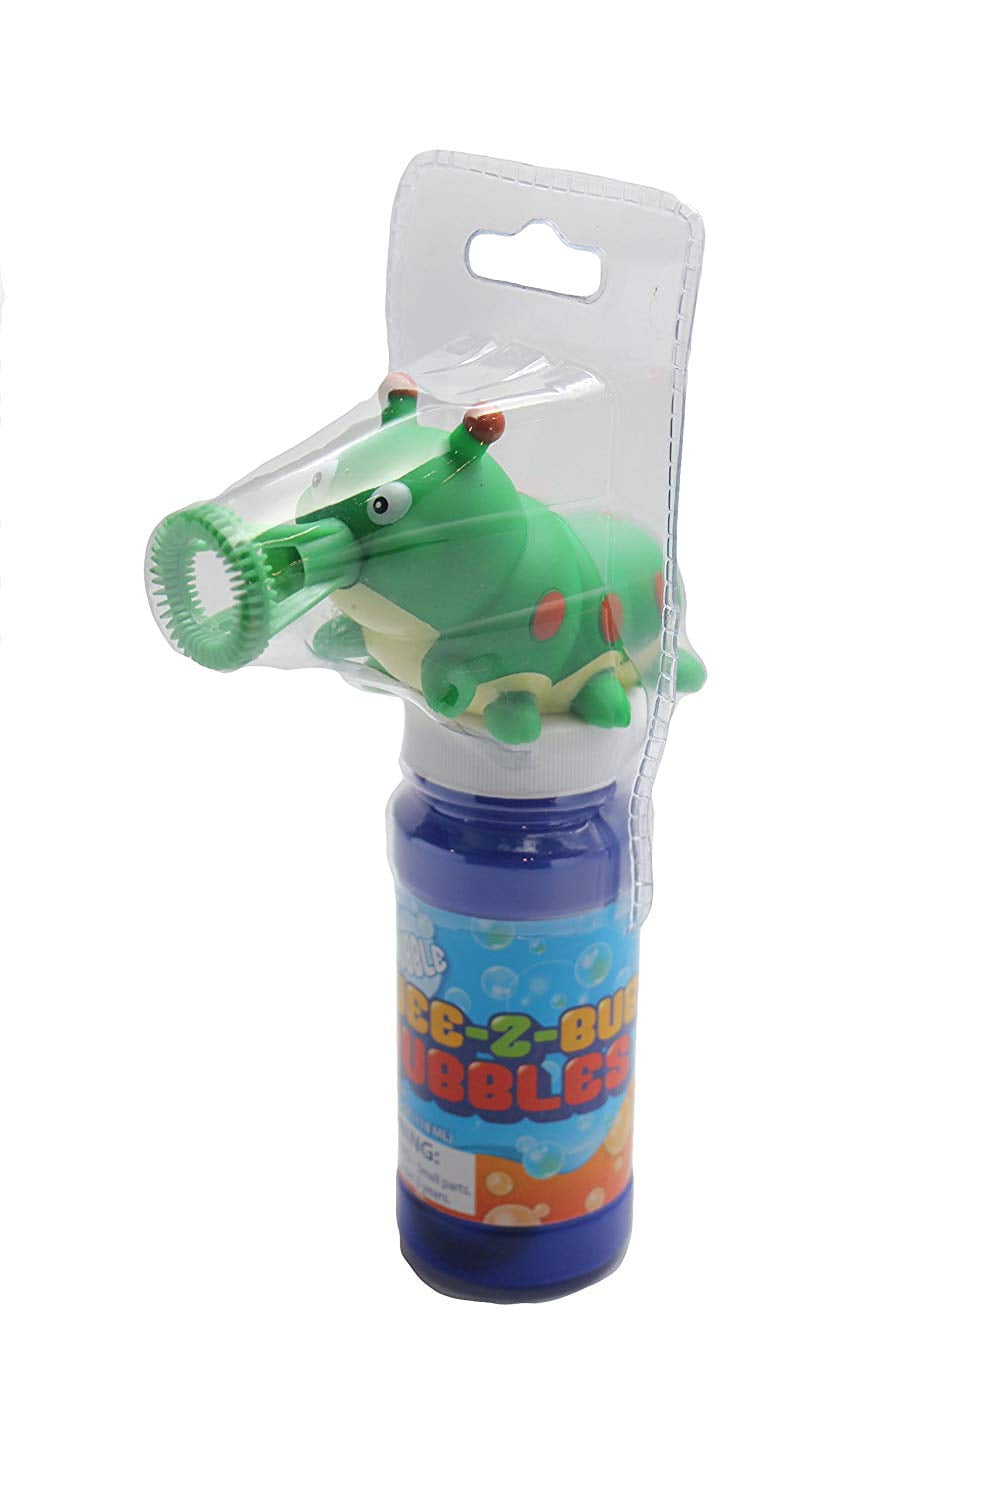 Animal Bubble Blower Toy - Dip and Squeeze - No Blowing Needed! (Green Caterpillar)